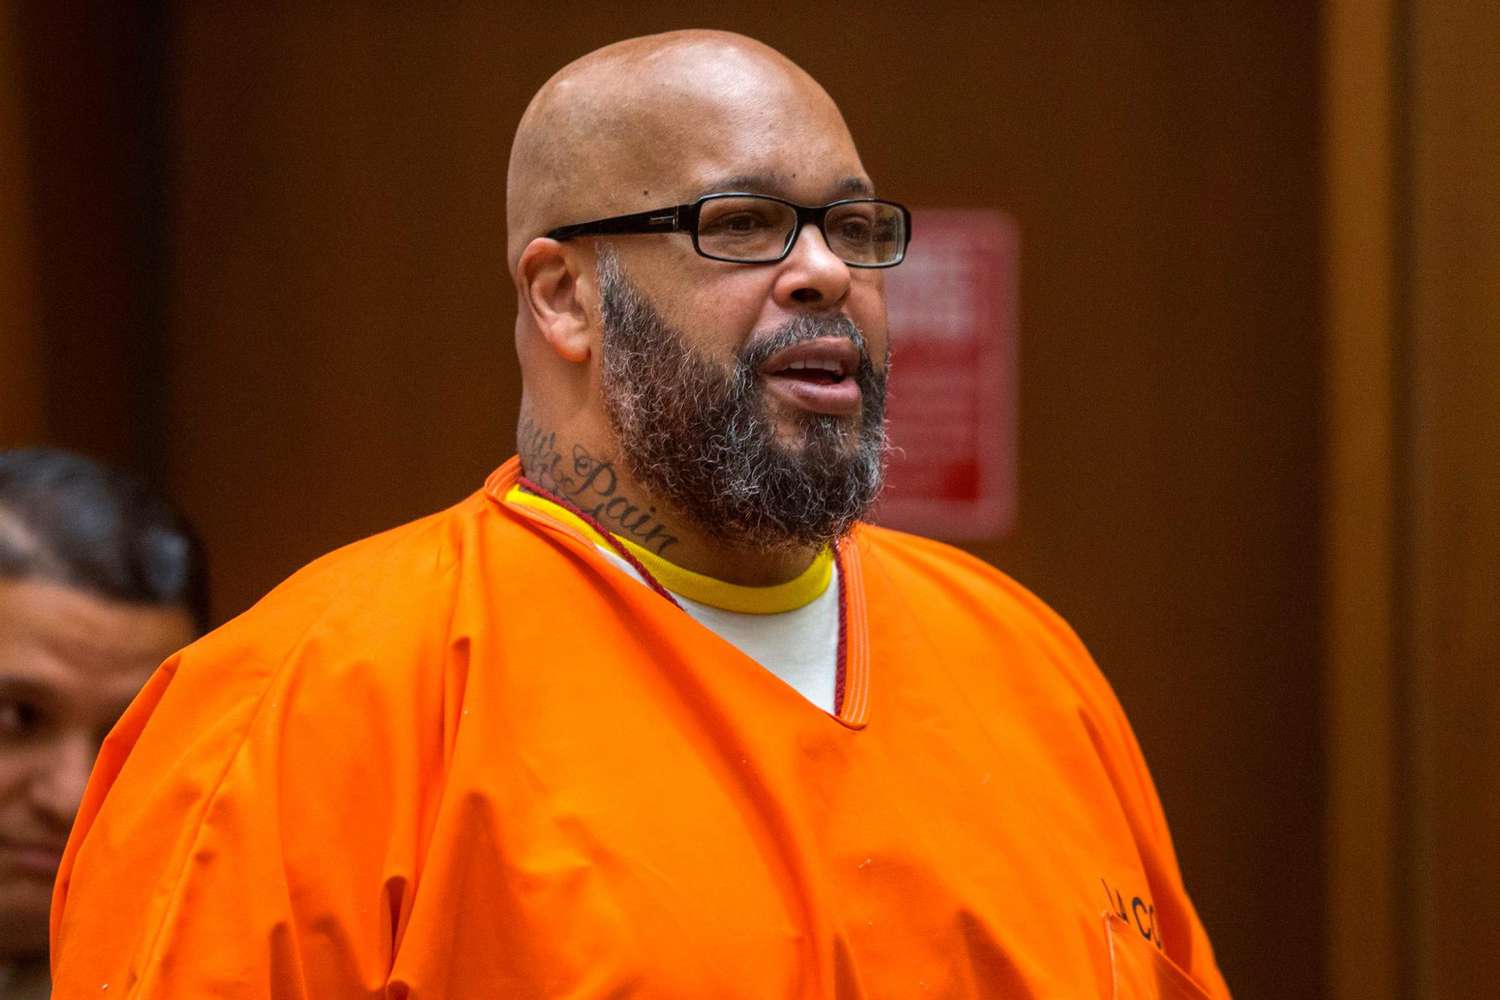 Suge Knight to Serve 28 Years in Prison After Reaching Plea Deal | PEOPLE.com